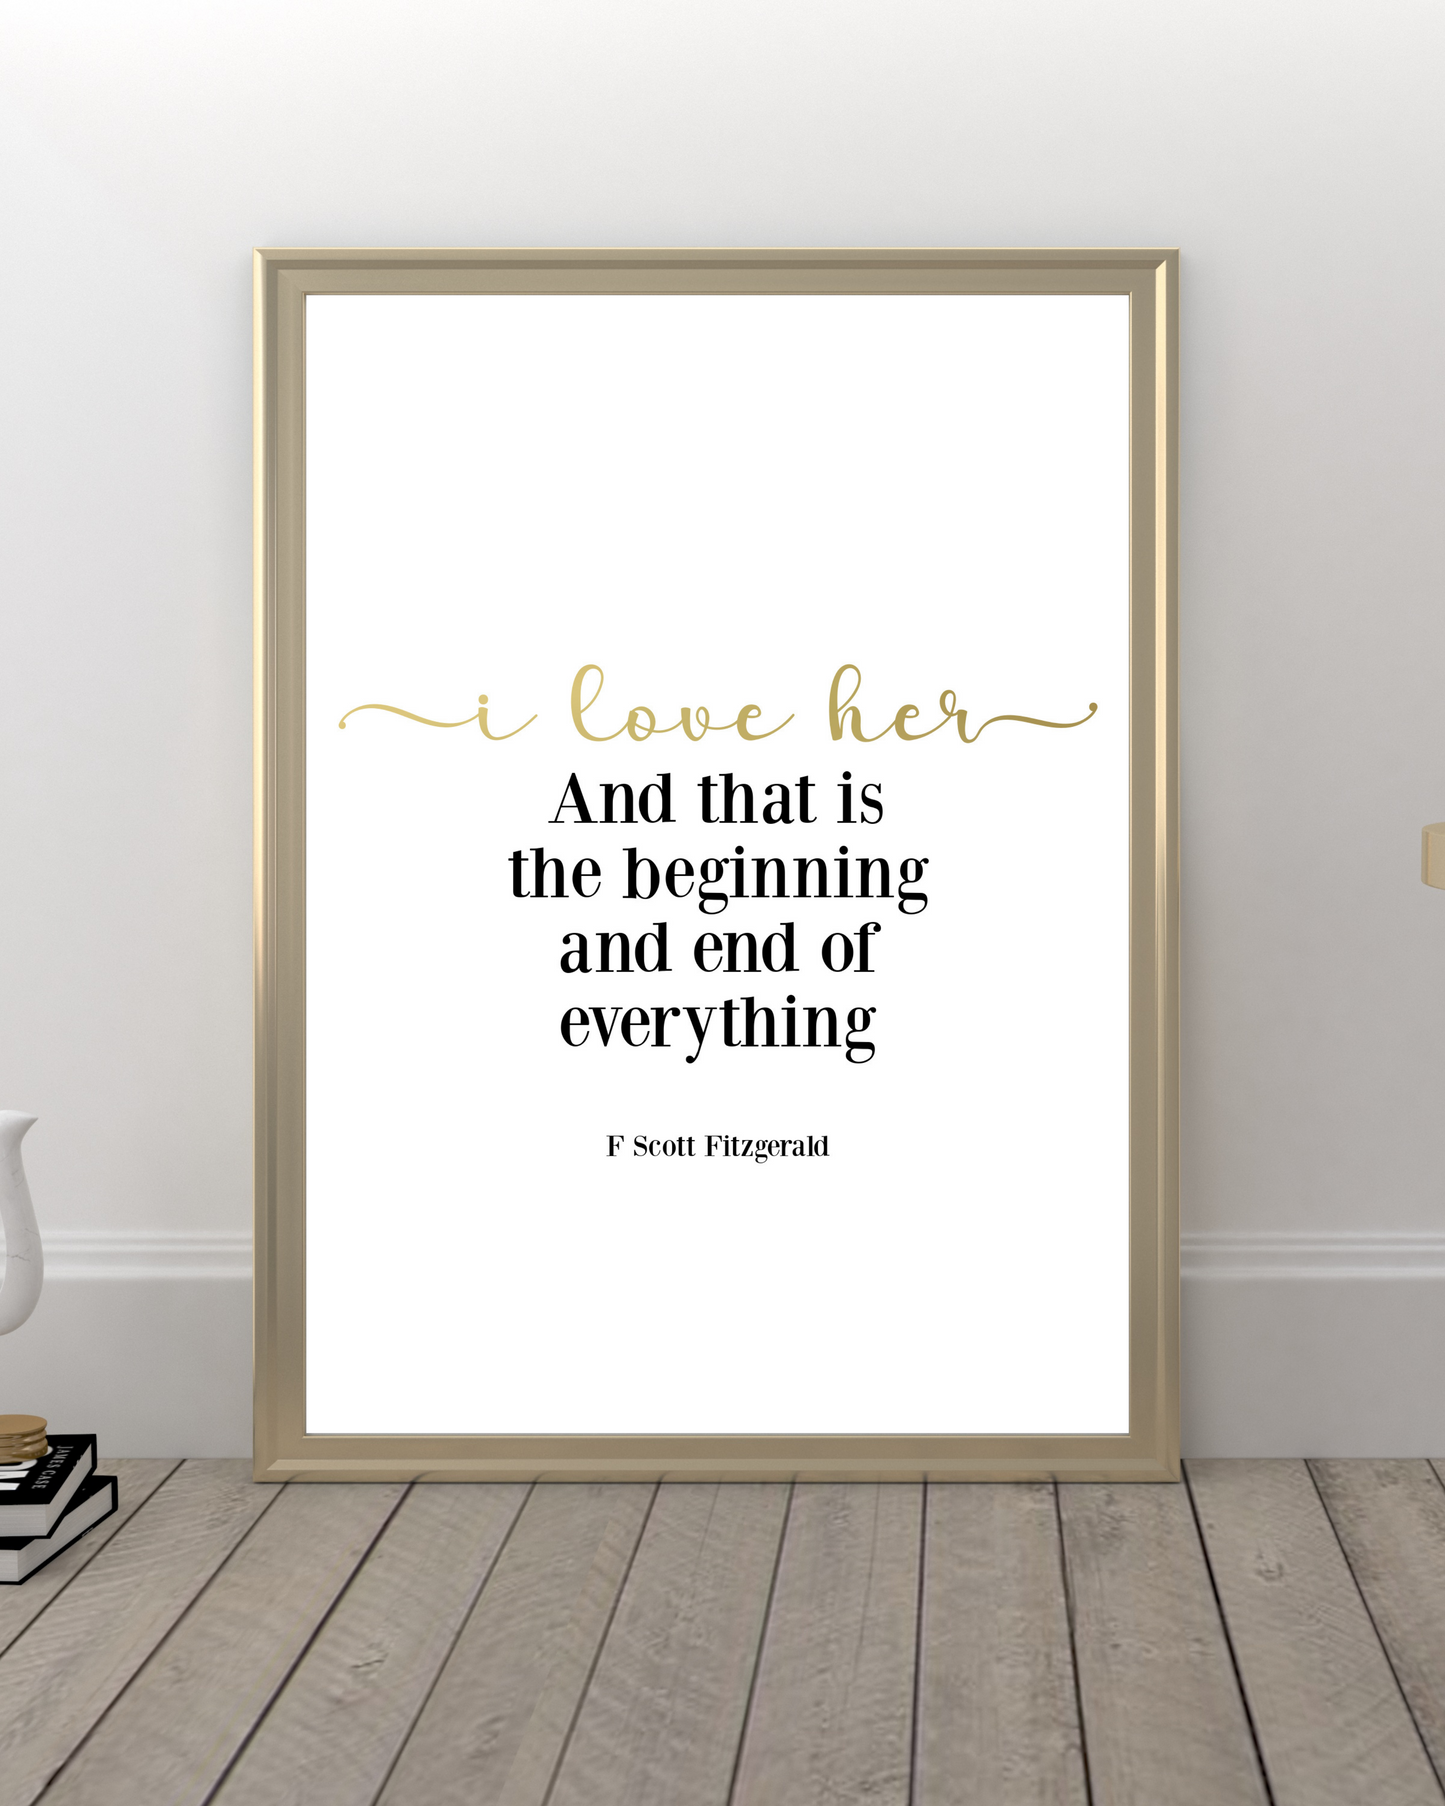 "I Love Her And That Is The Beginning And End Of Everything" Famous Quote By F. Scott Fitzgerald, Literary Quotes, Love Quotes, Printable Art